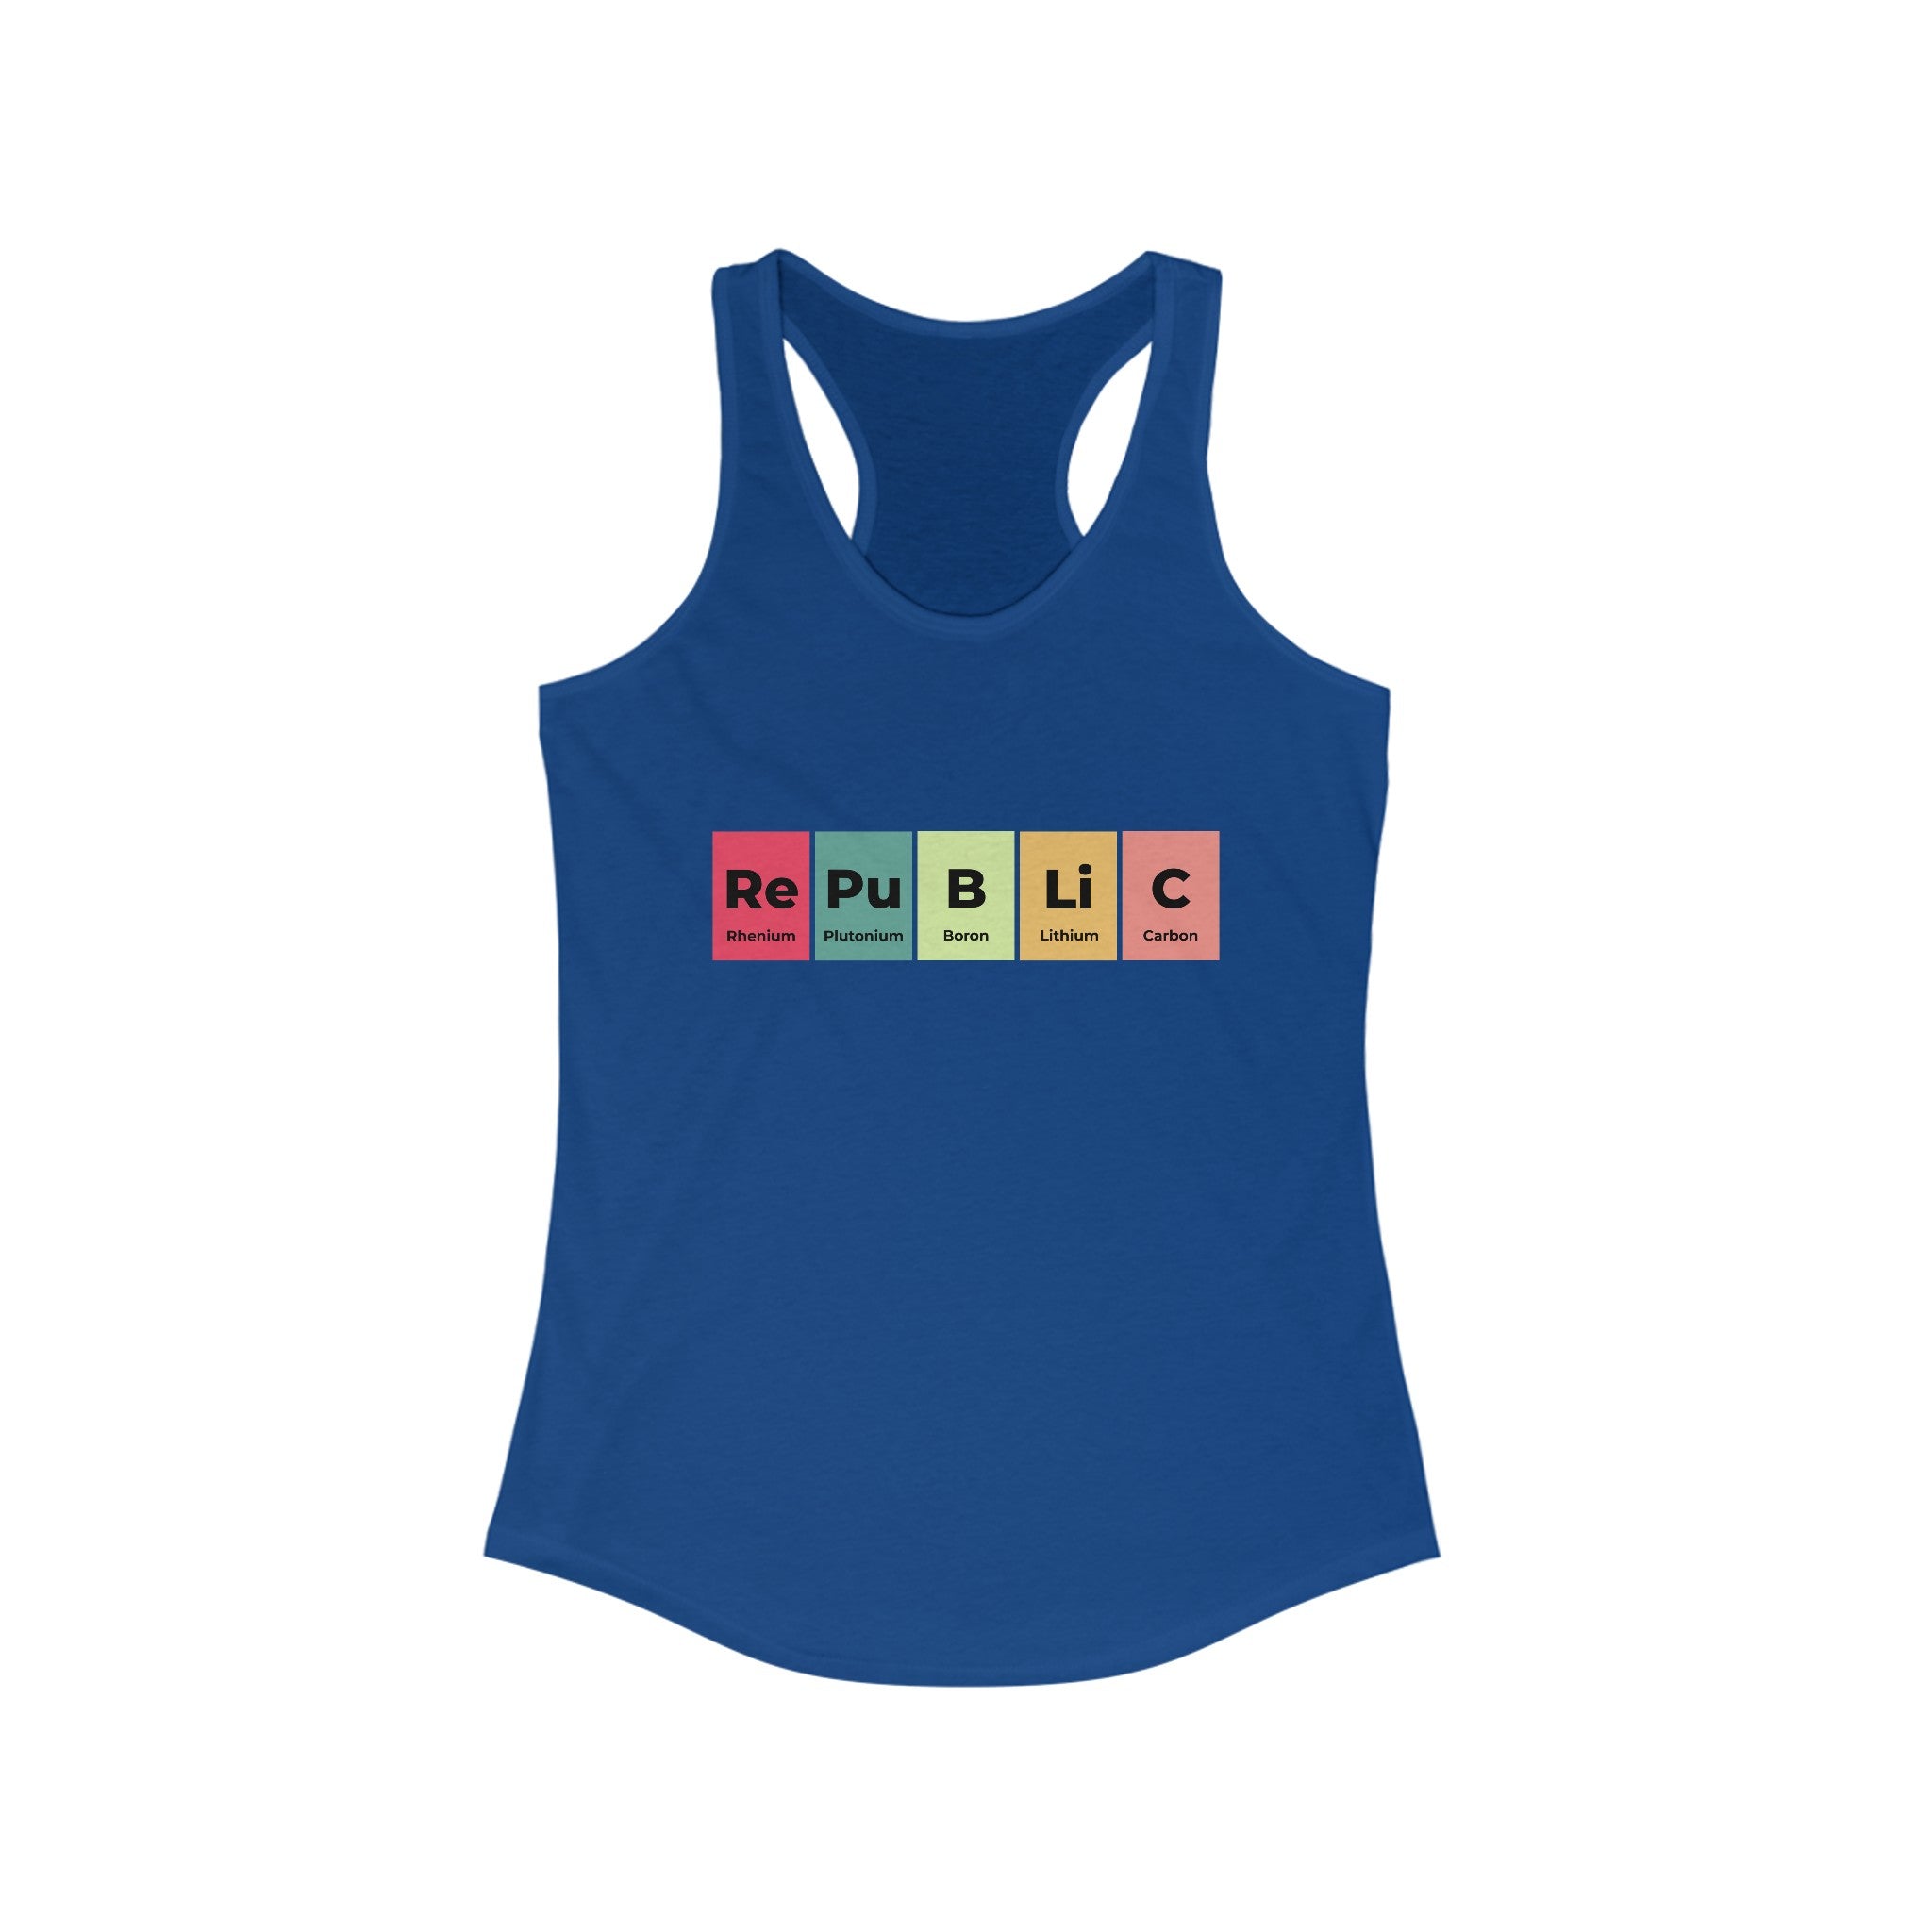 Republic - Women's Racerback Tank featuring "RePuBLiC" spelled using colorful periodic table elements: Rhenium, Plutonium, Boron, Lithium, and Carbon. Ideal for your fitness journey, this ultra-lightweight blue tank top offers style and comfort.